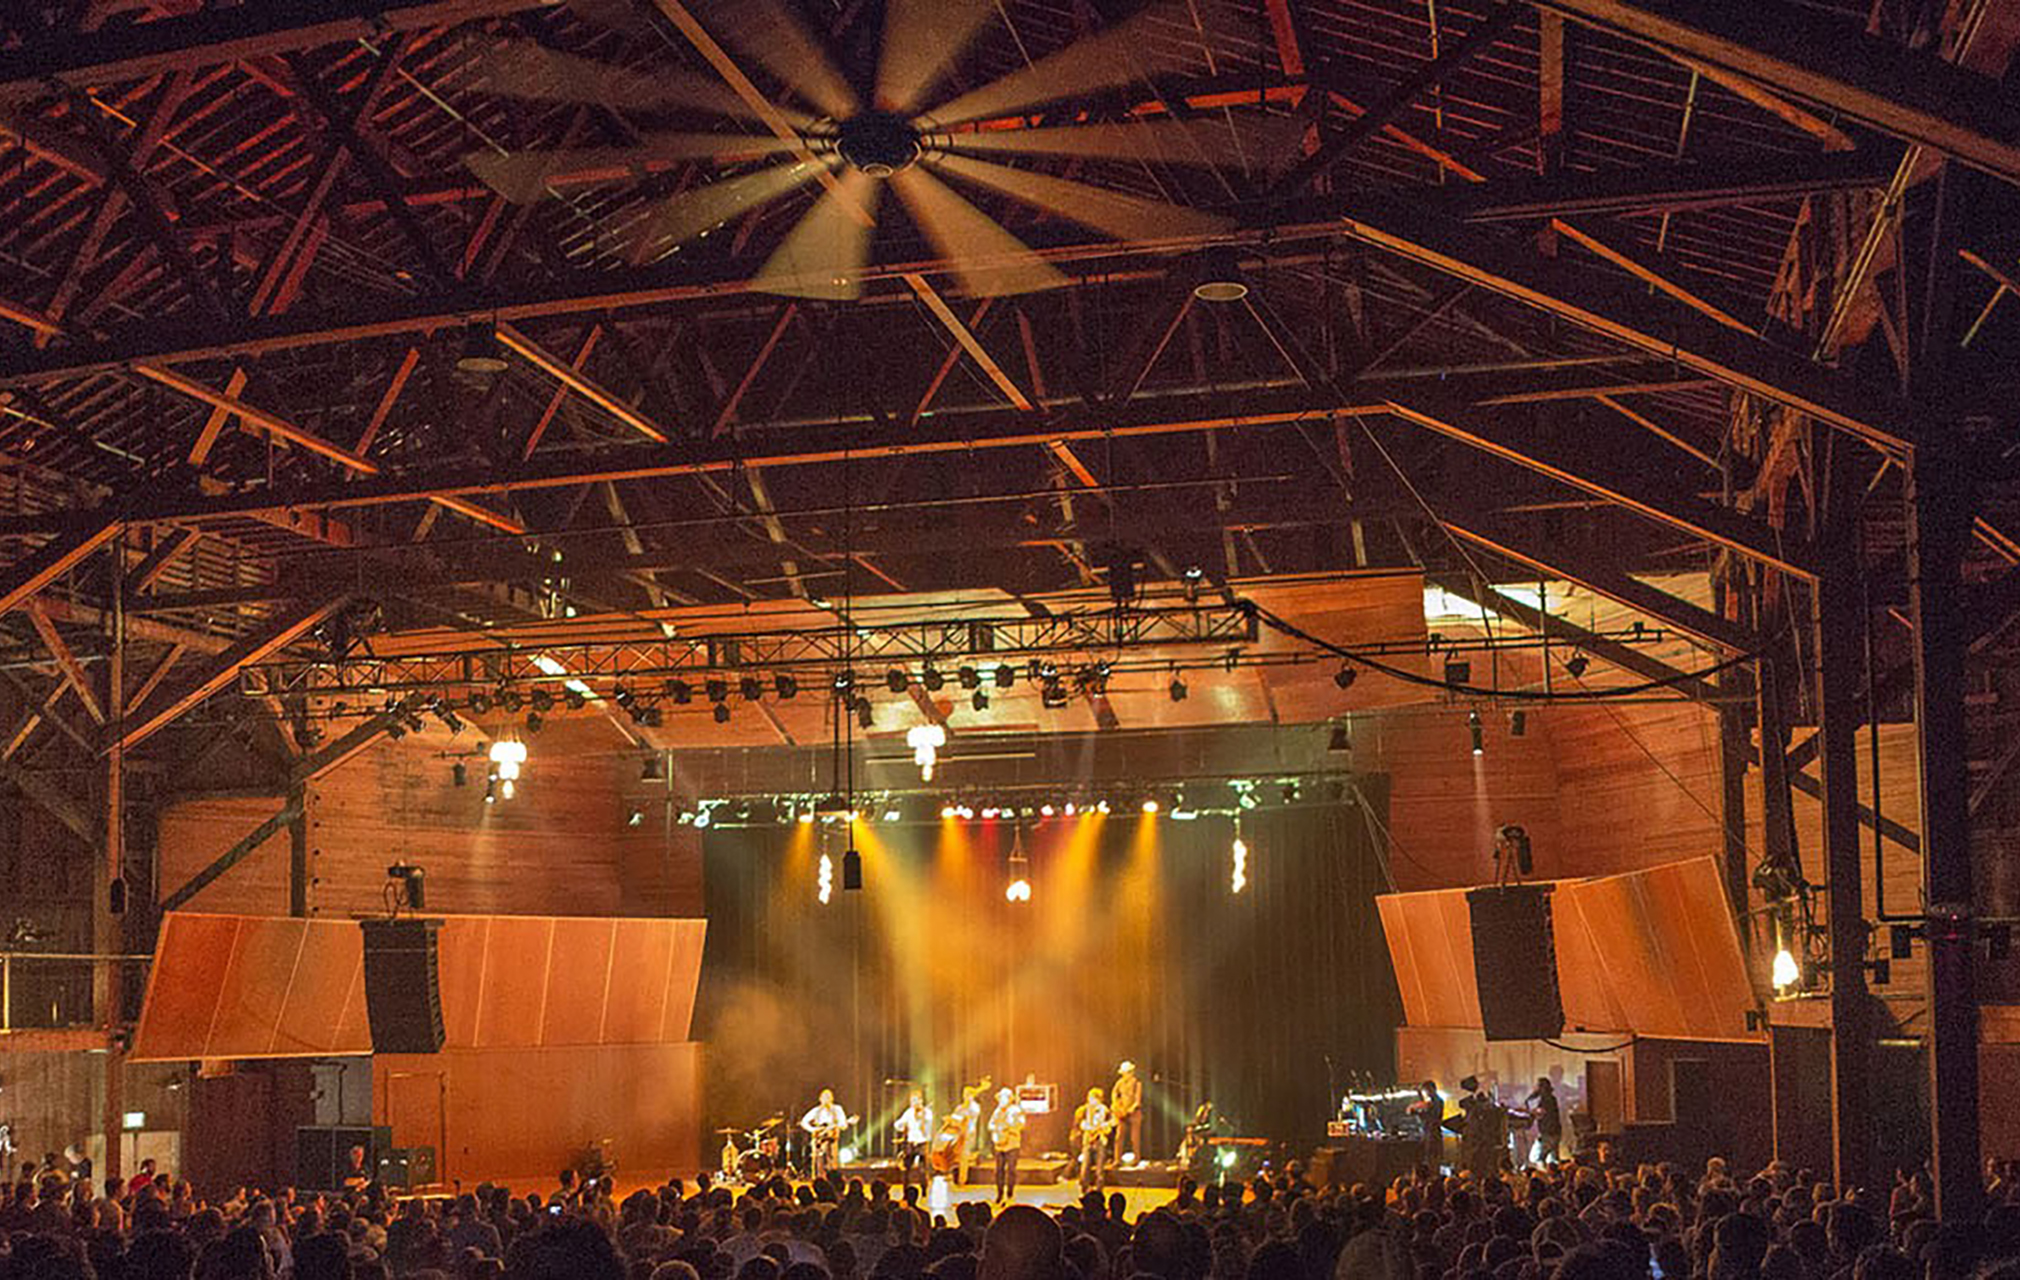 The Chautauqua auditorium during and event, with a large audience in the foreground and a band playing in the center